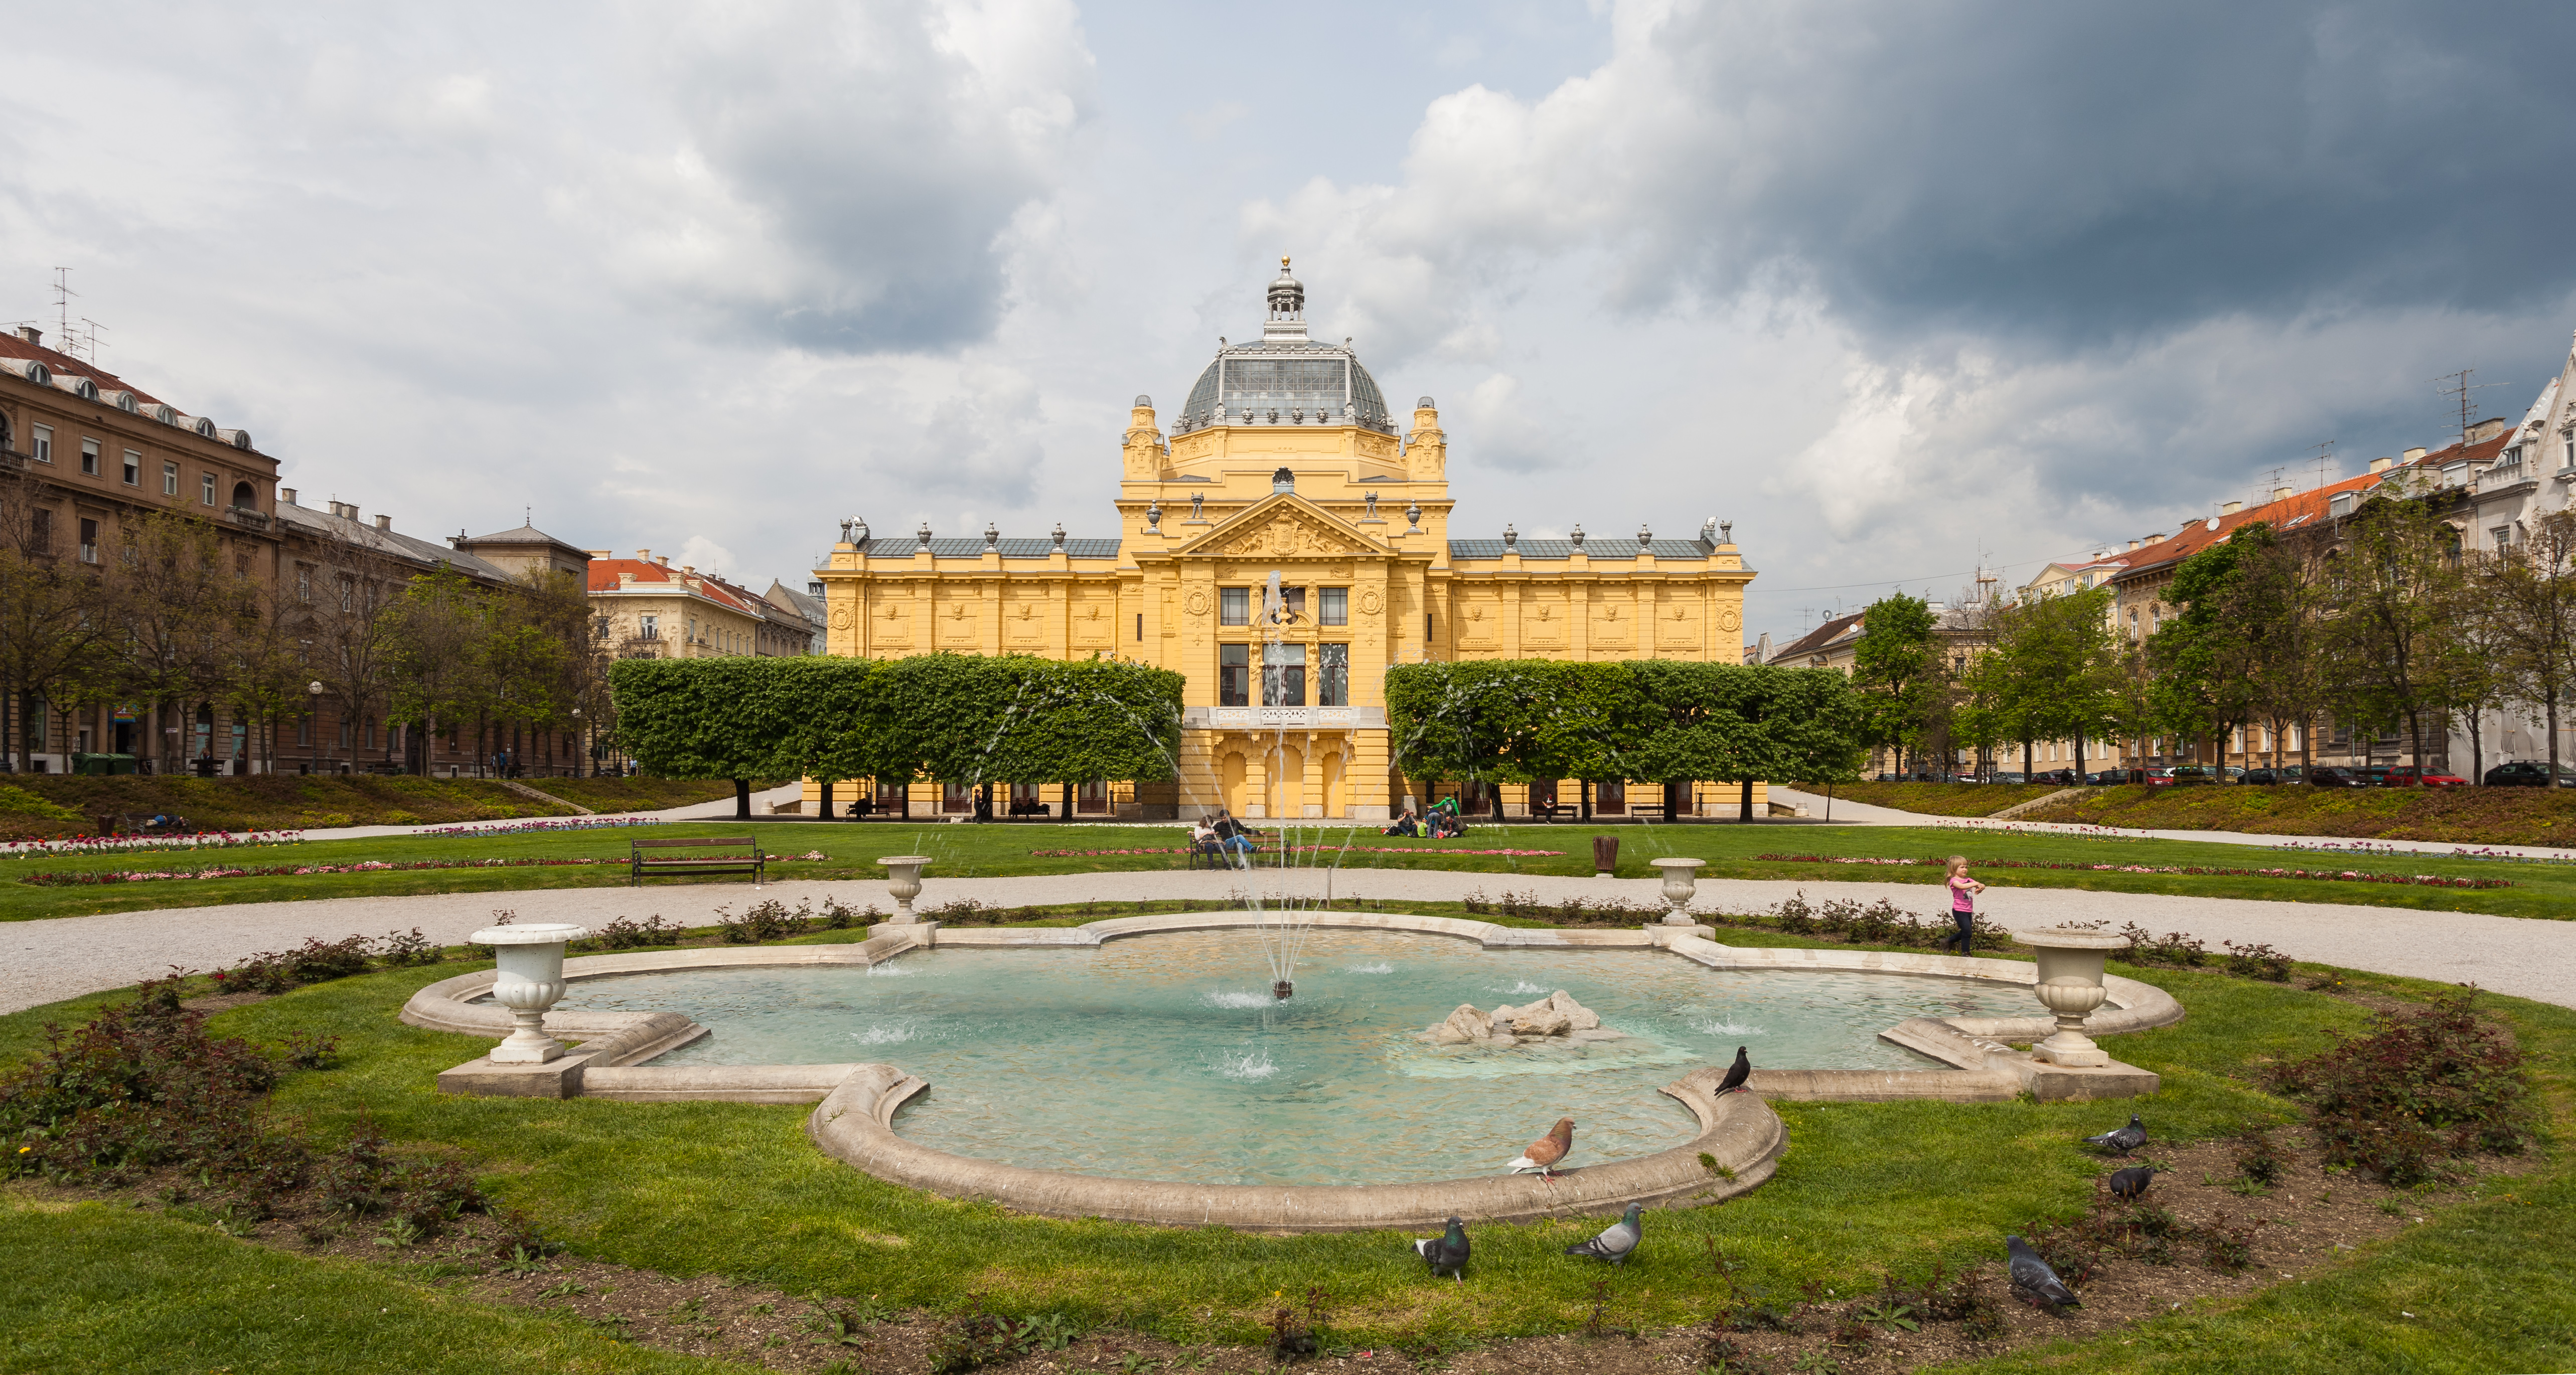 Legends That Bring Zagreb's Past to Life